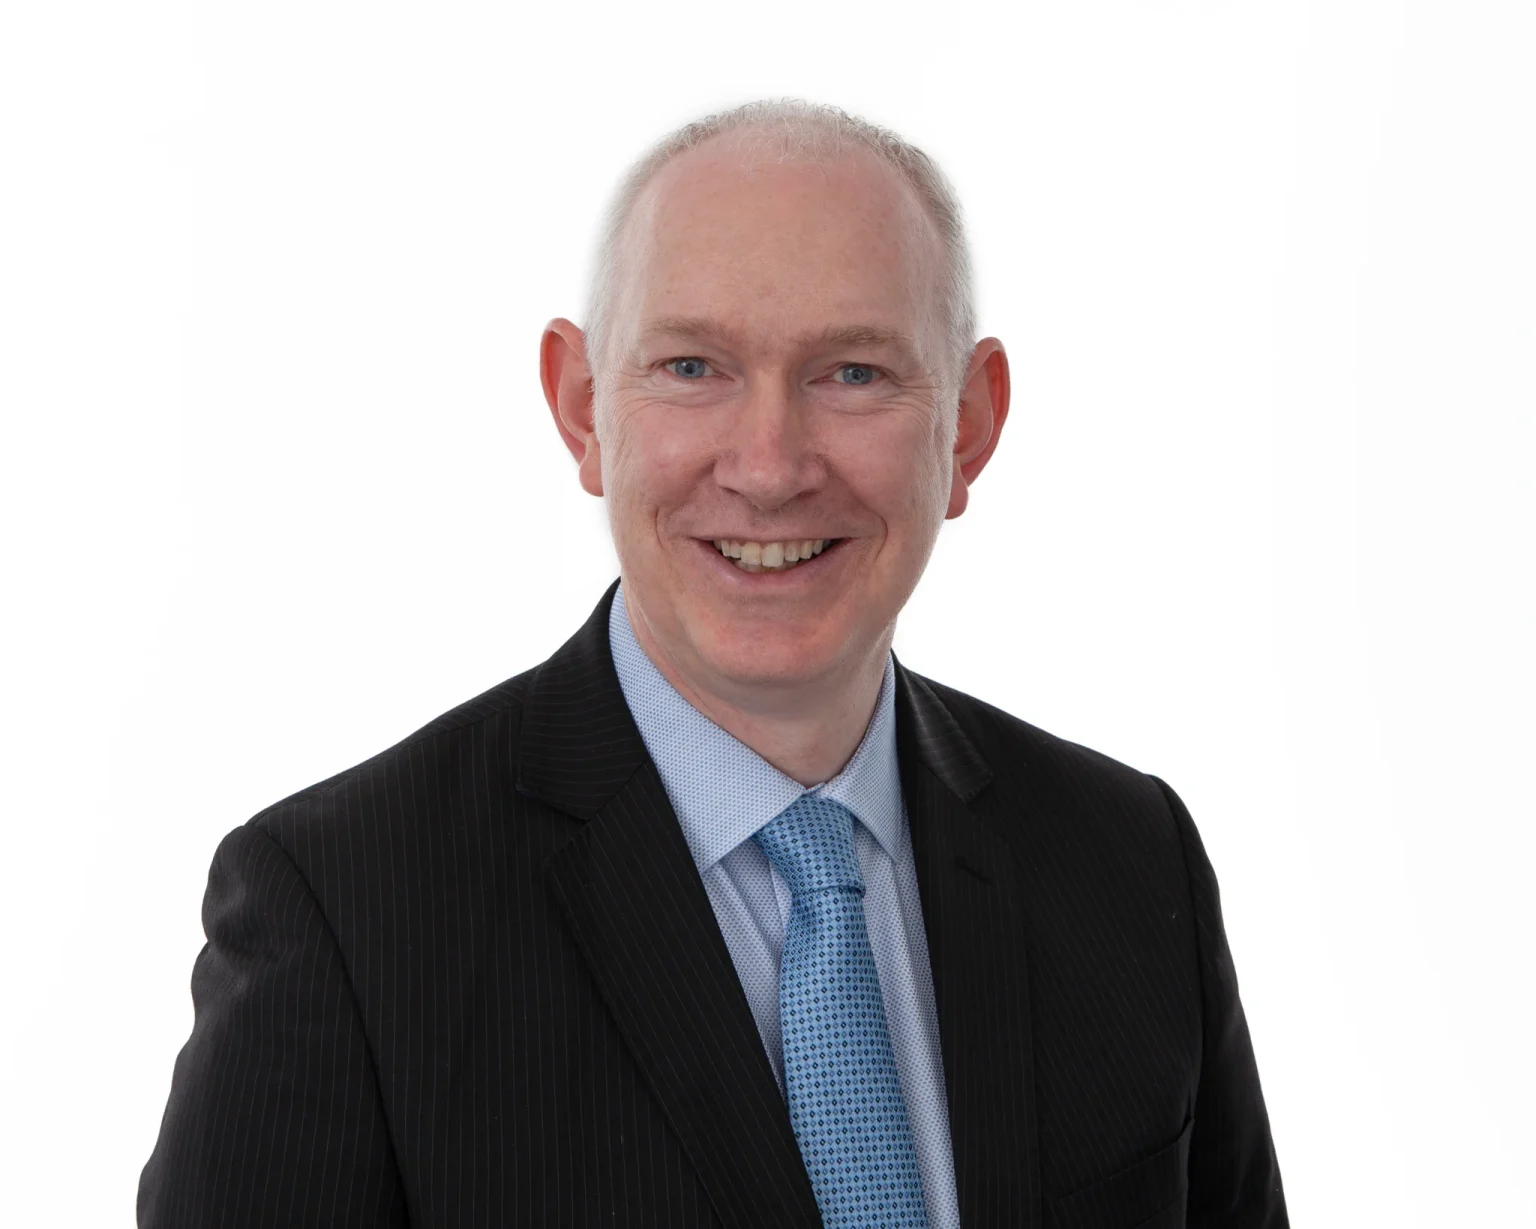 Jim-Downing-Employment-Law-Solicitor-Dublin